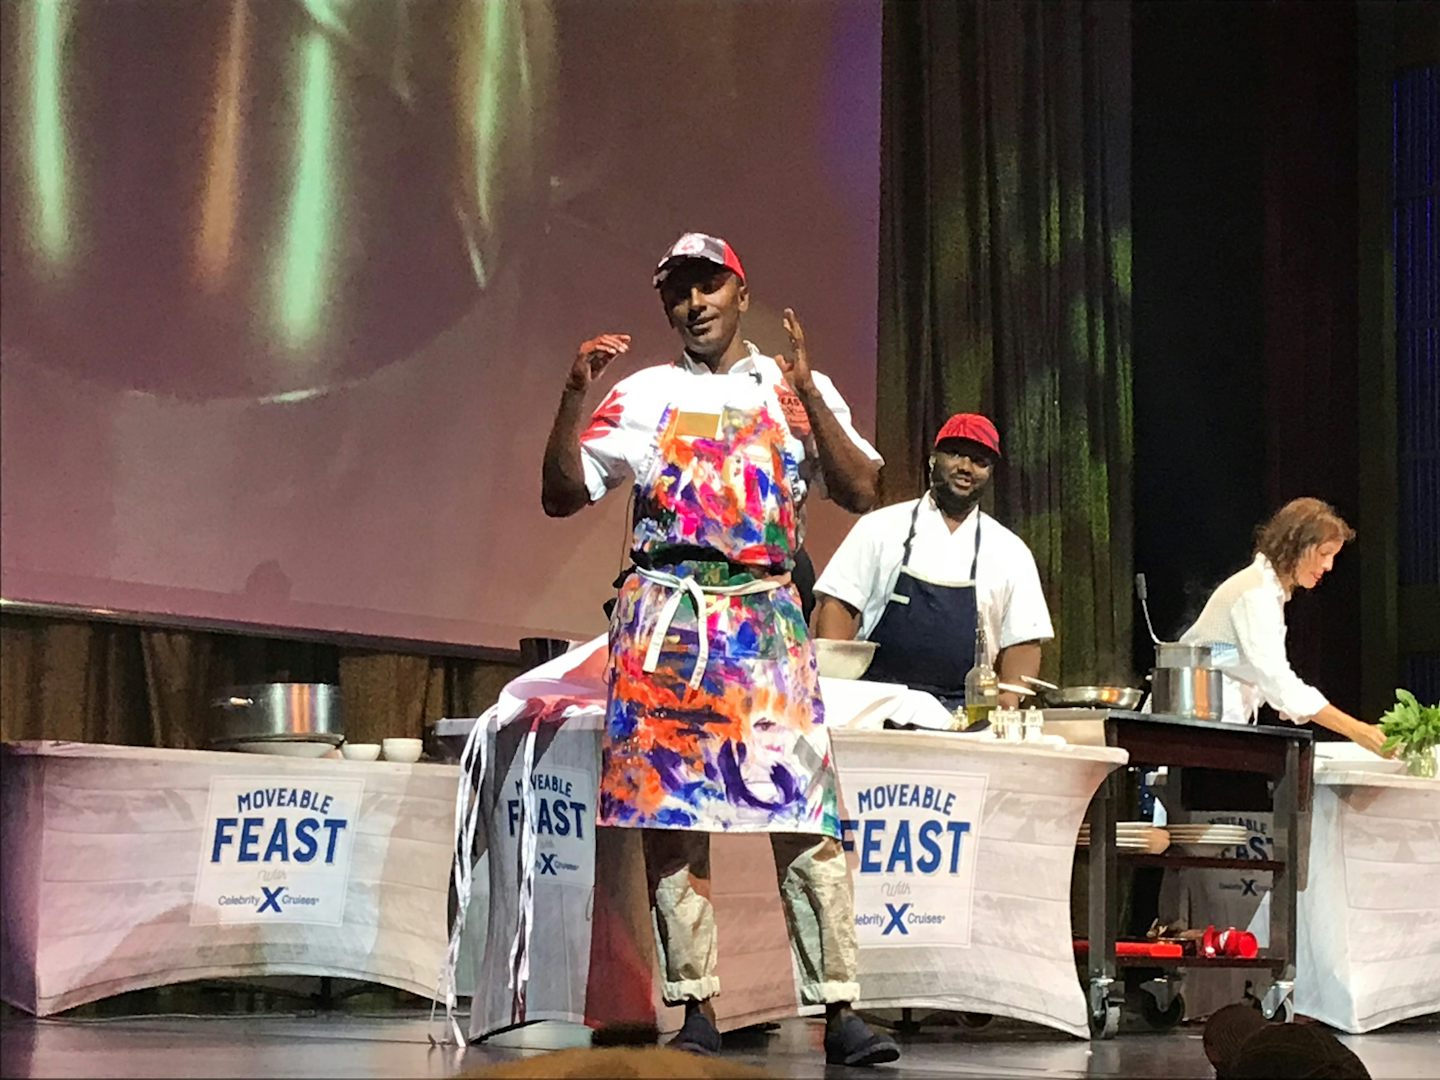 Marcus Samuelsson cooking for 'Moveable Feast' activity onboard